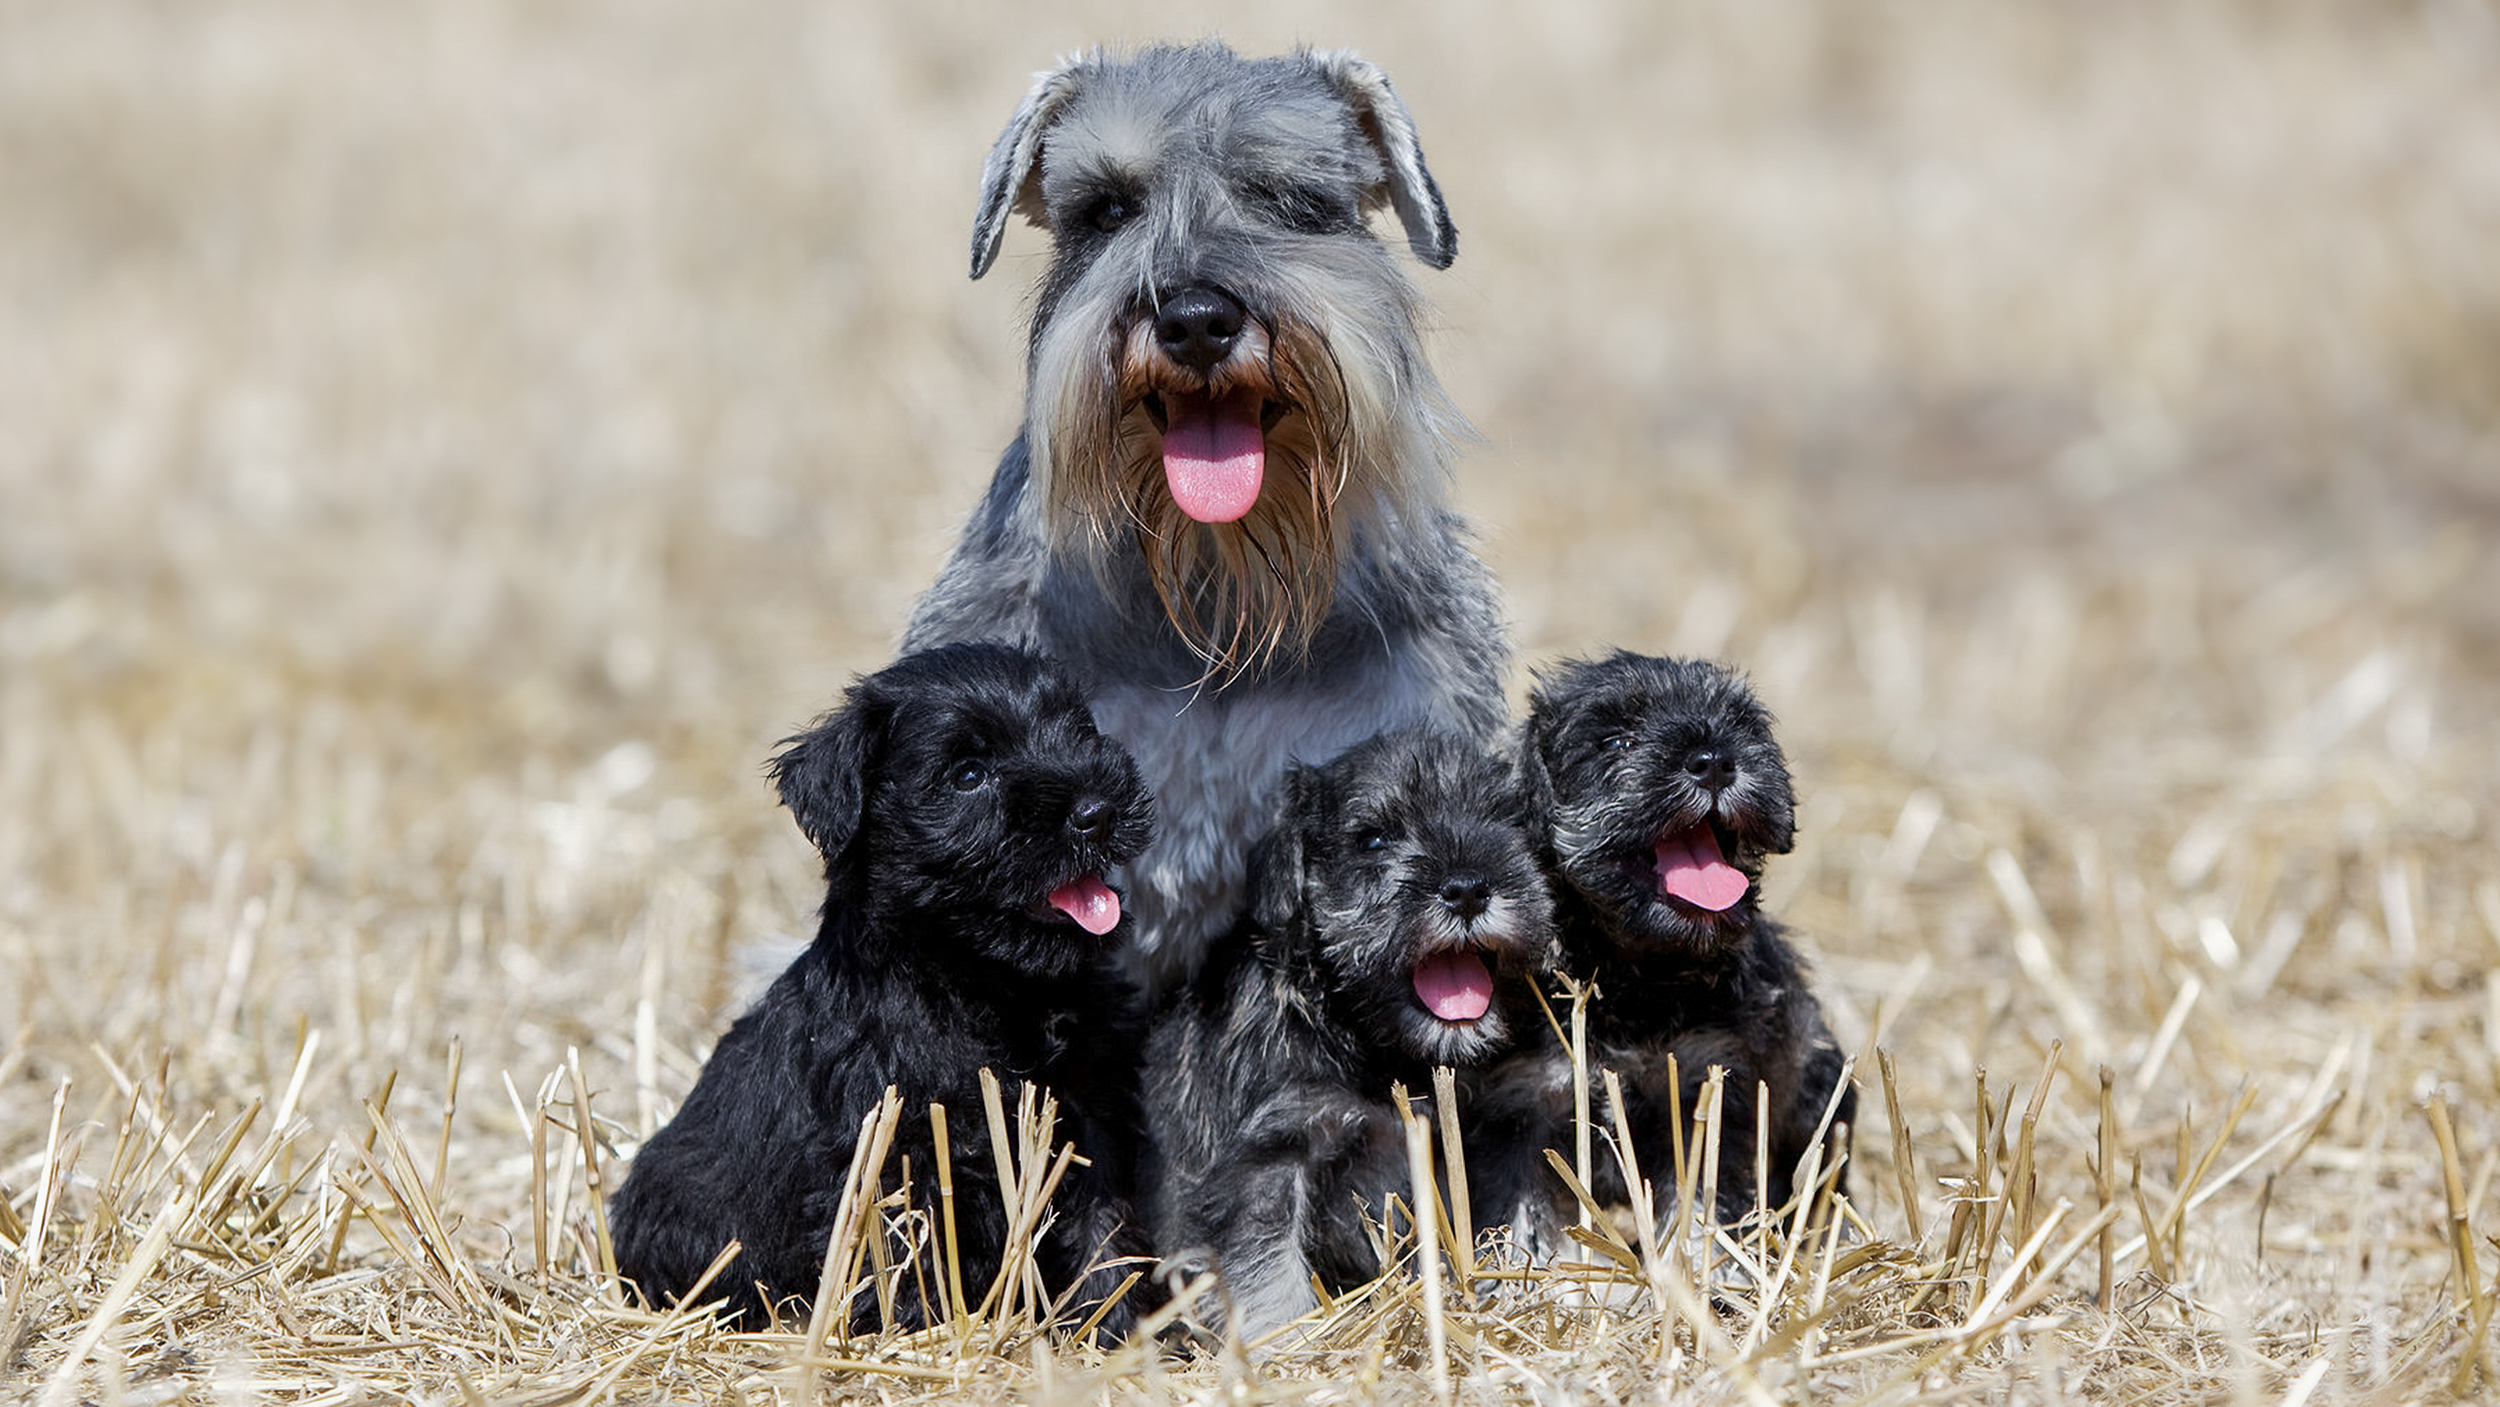 Adult Miniature Schnauzer sitting with three puppies in a field.